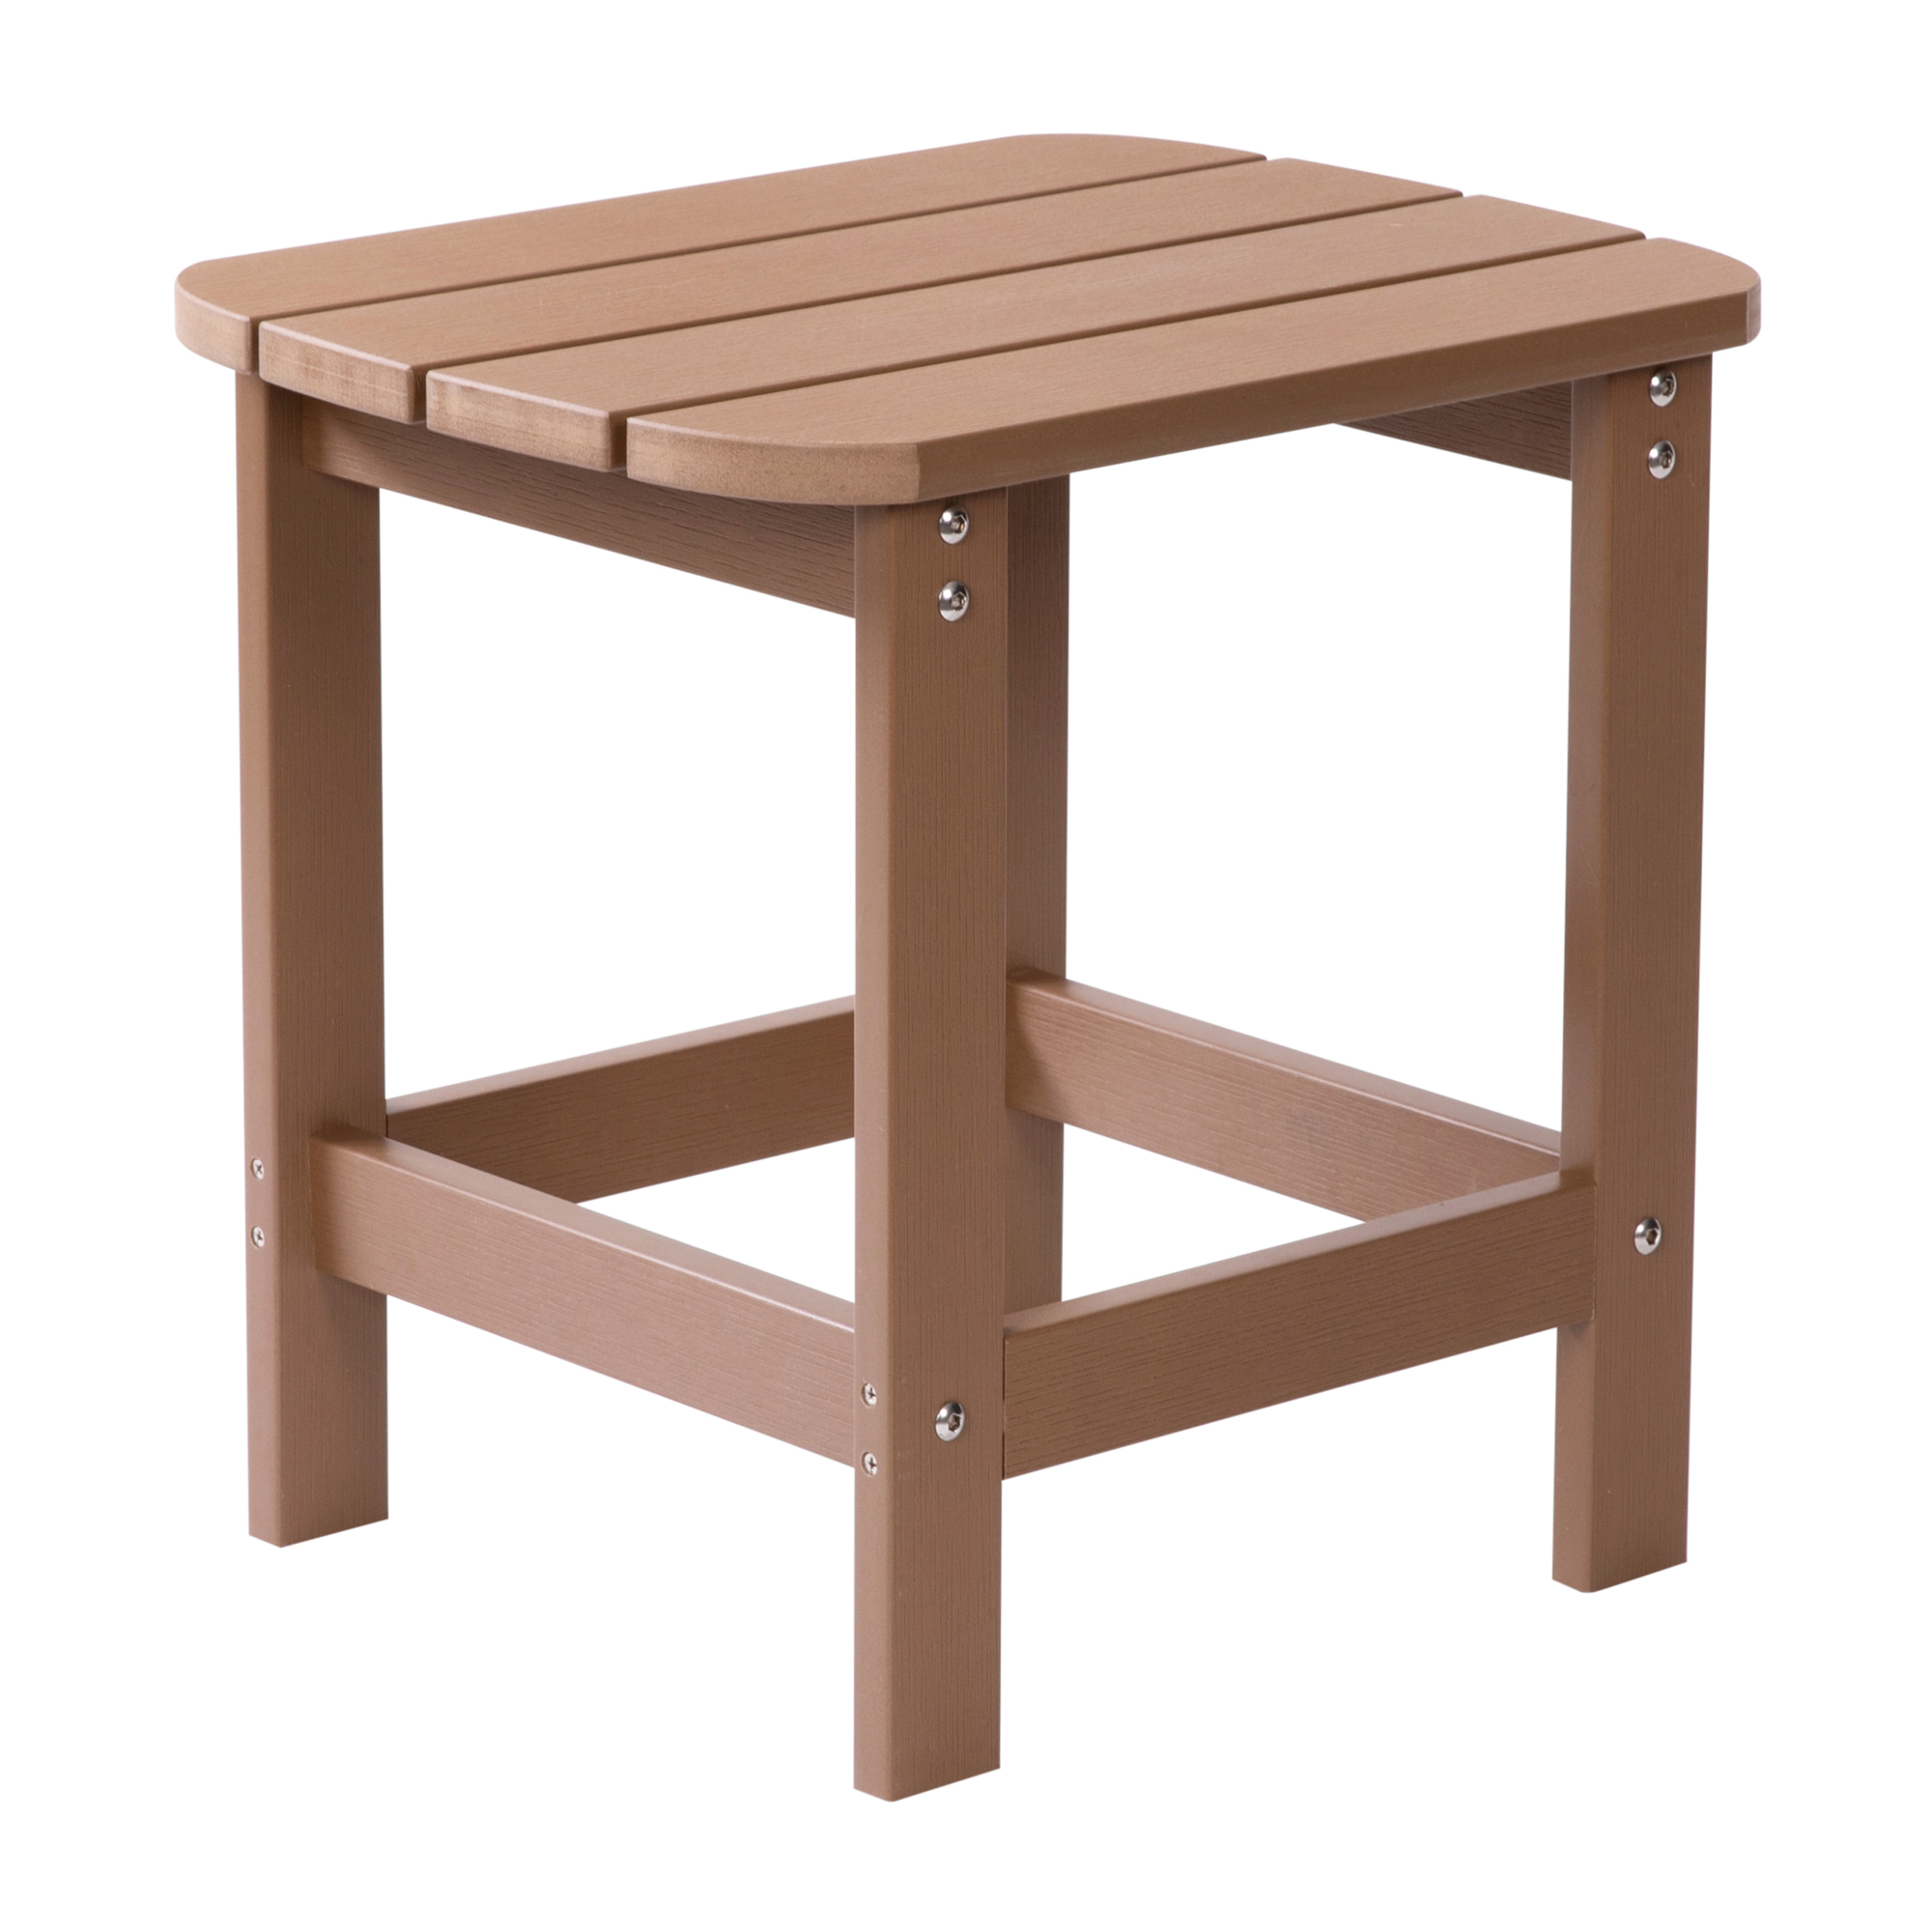 Flash Furniture, Natural Cedar All-Weather Adirondack Side Table, Table Shape Rectangle, Primary Color Brown, Height 18.25 in, Model JJT14001BR